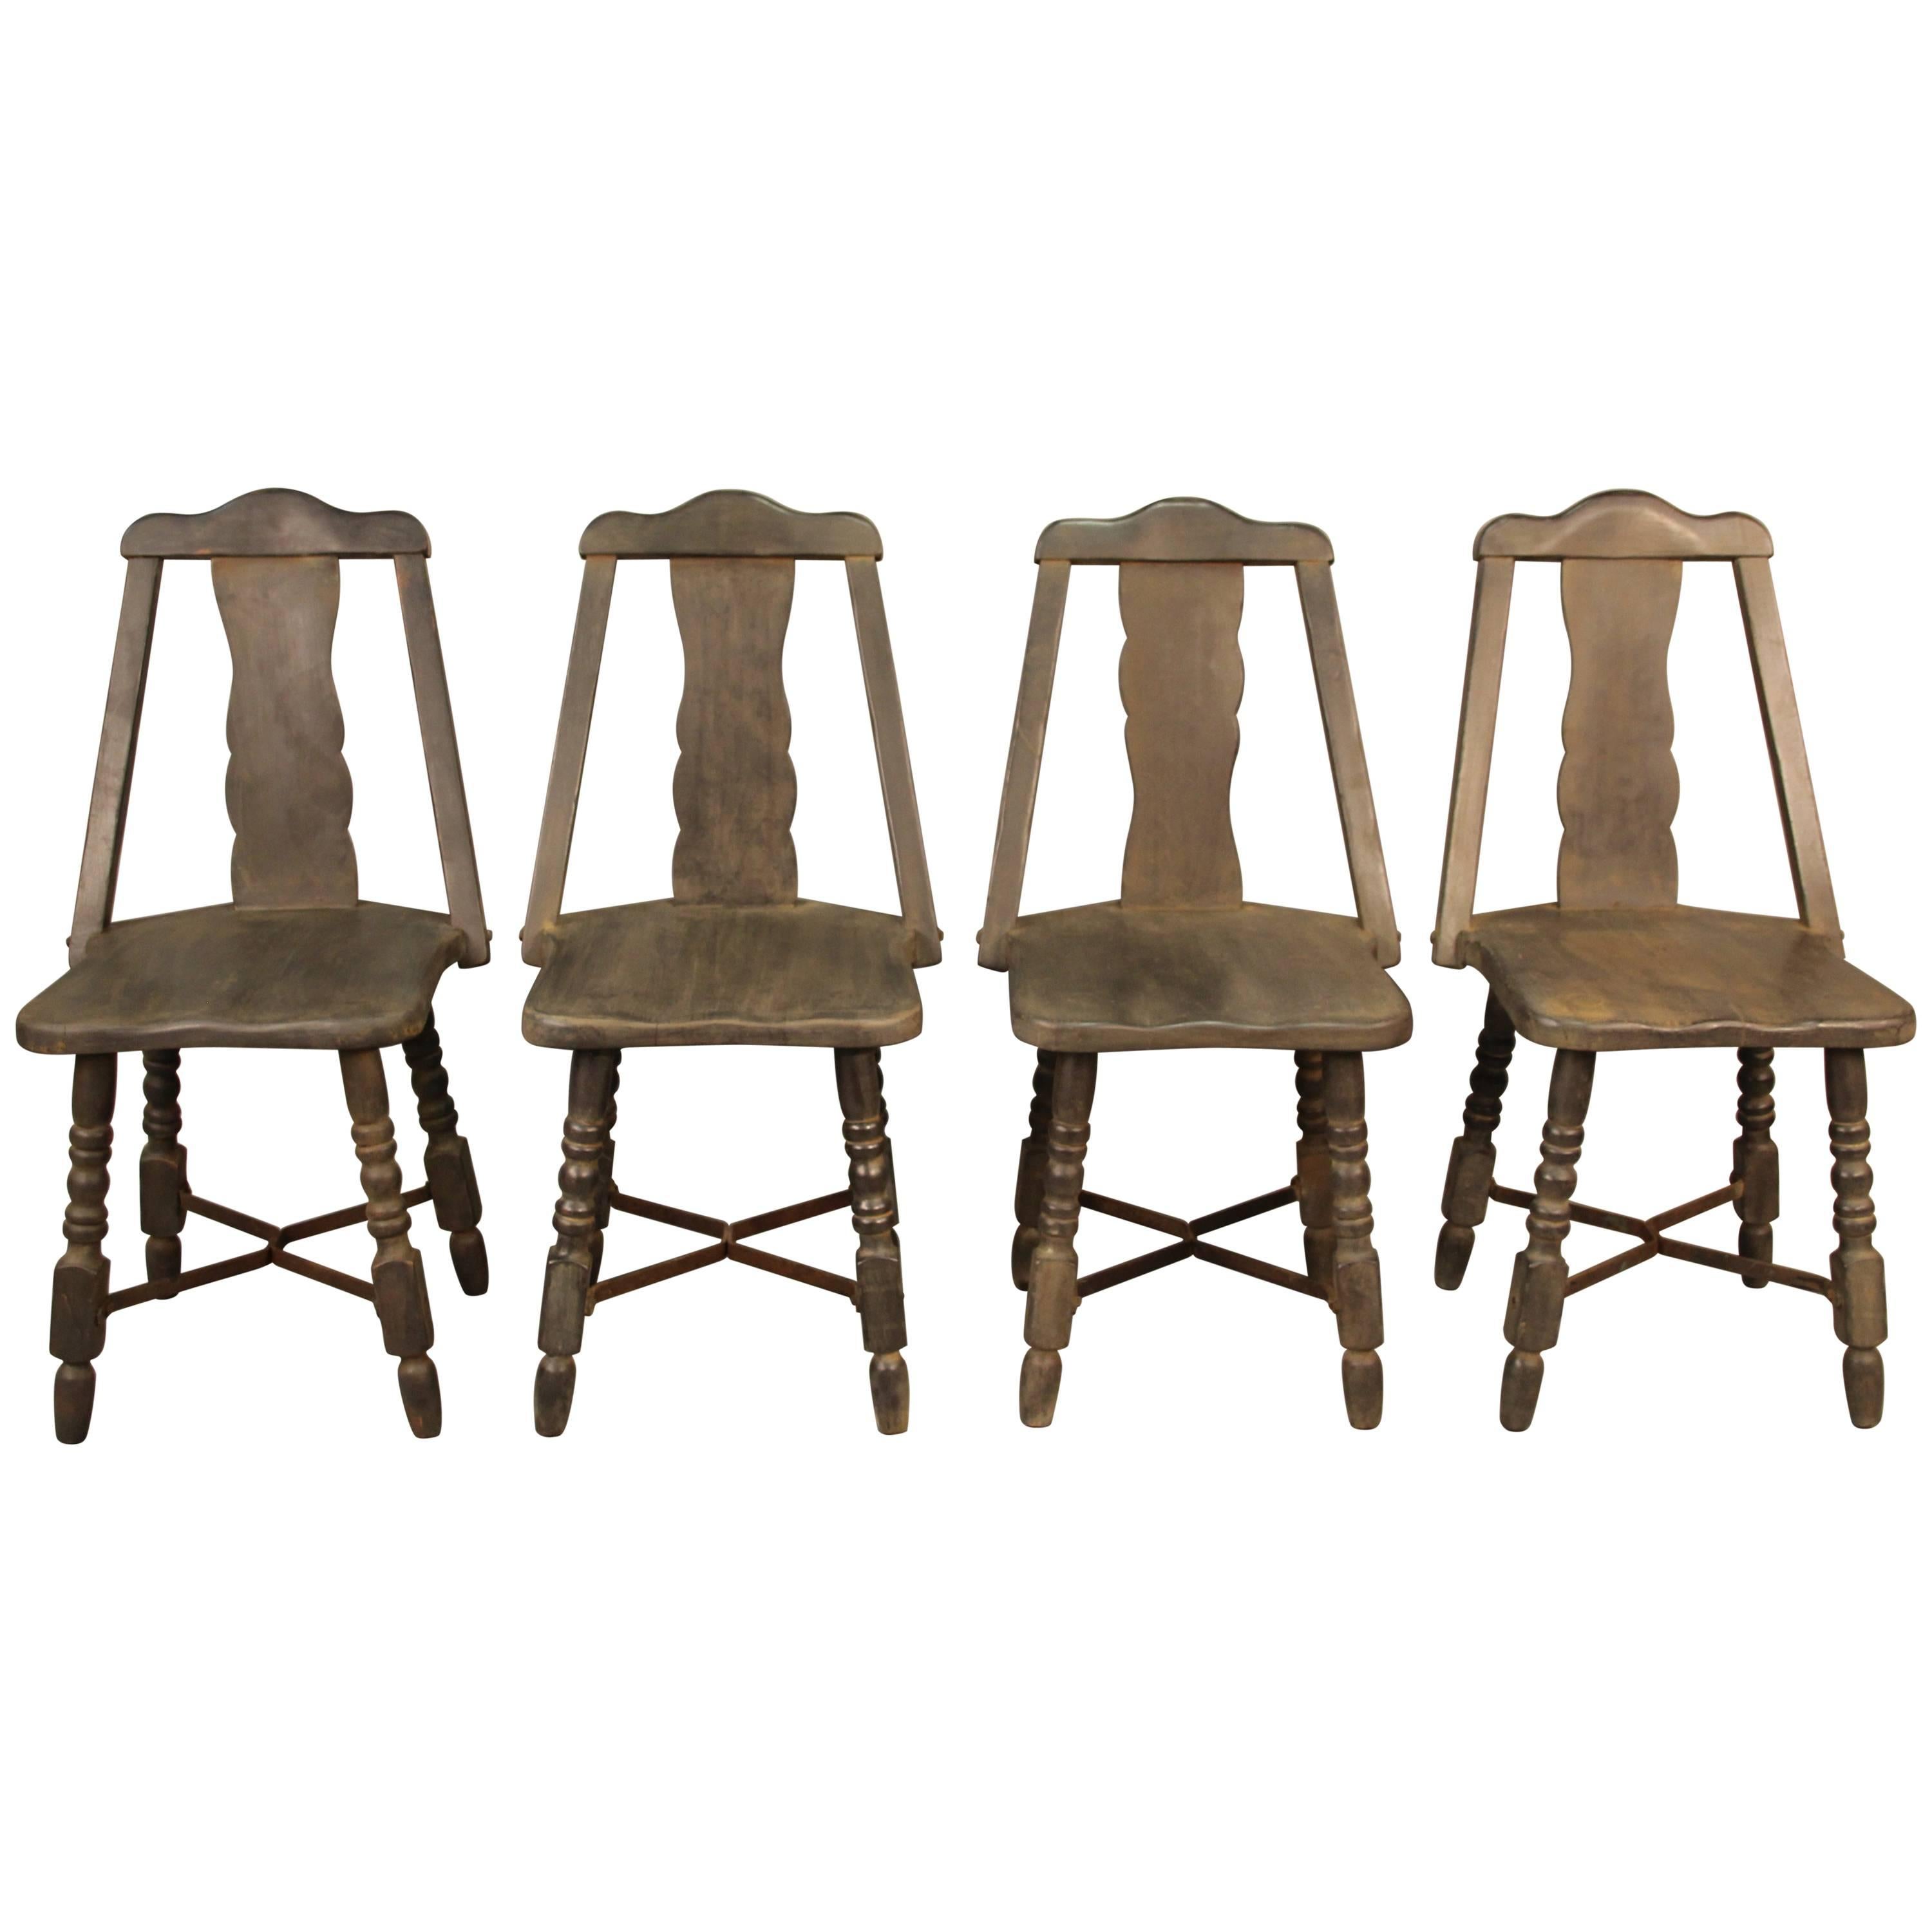 Set of Four Monterey Dining Room Chairs with Iron Cross Bars